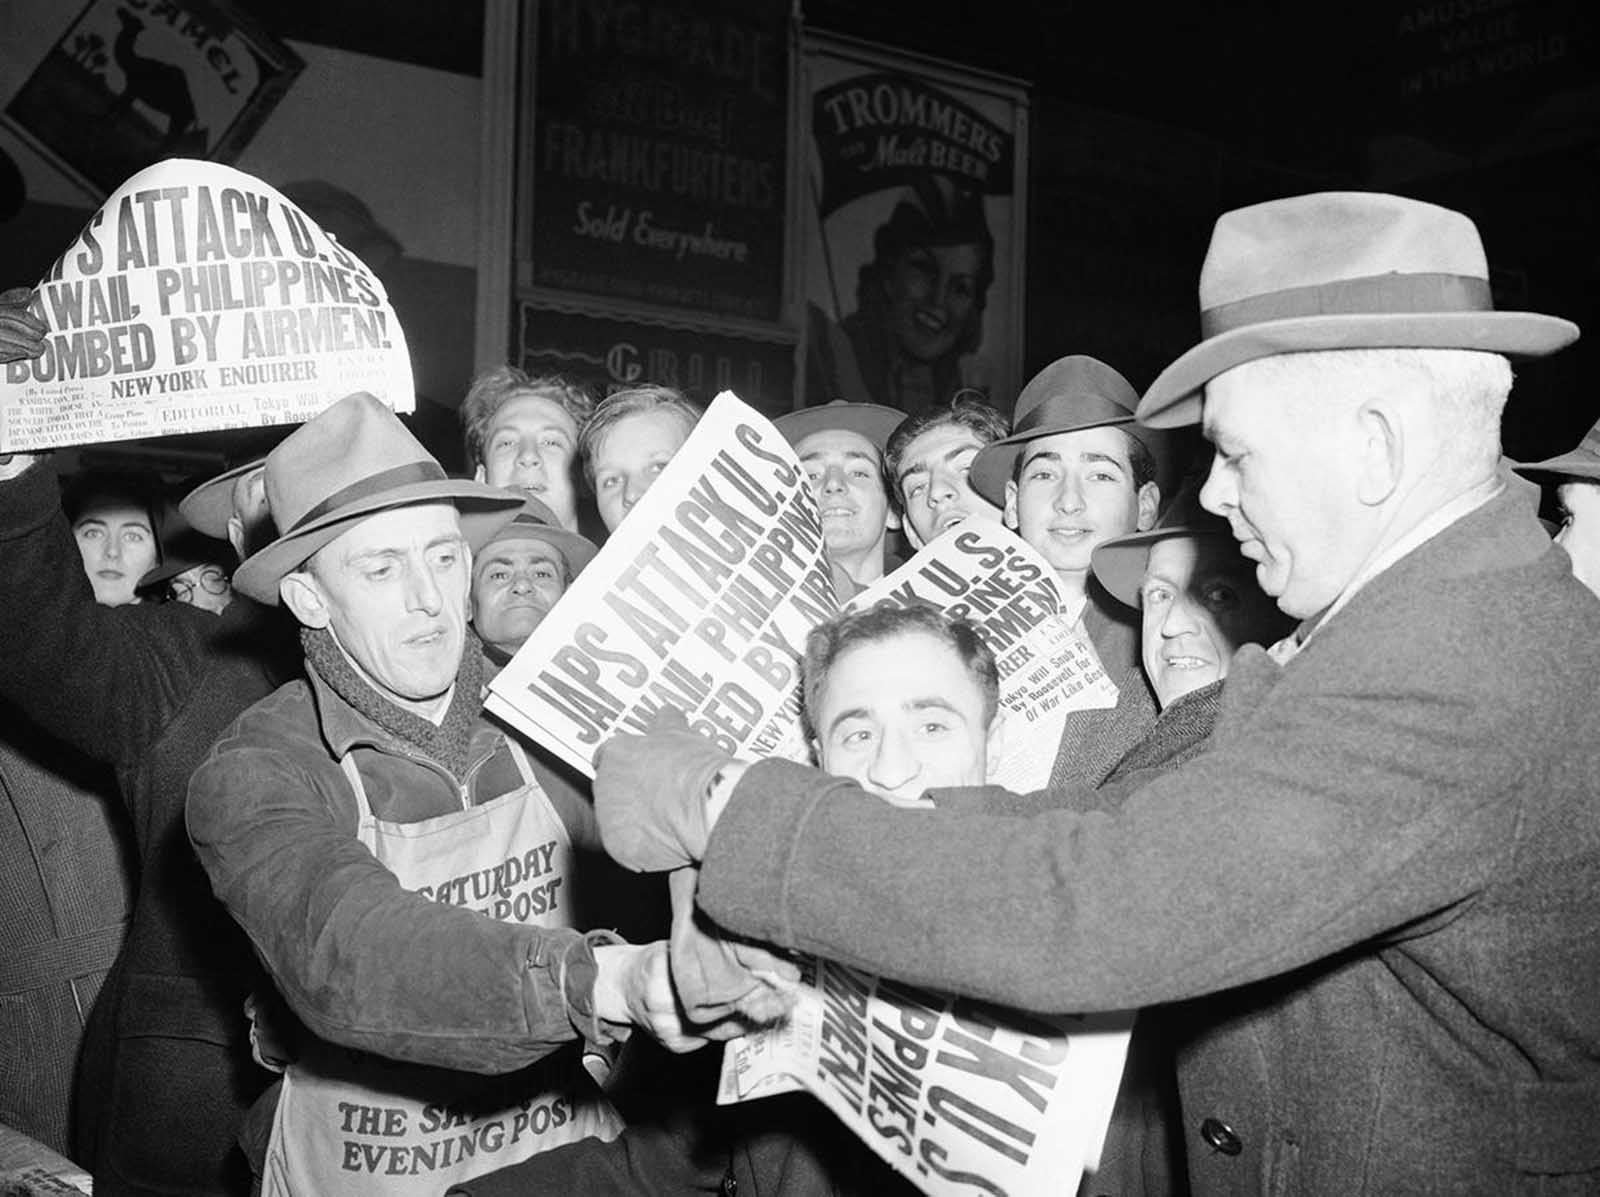 Selling papers on December 7, 1941 at Times Square in New York City, announcing that Japan has attacked U.S. bases in the Pacific.